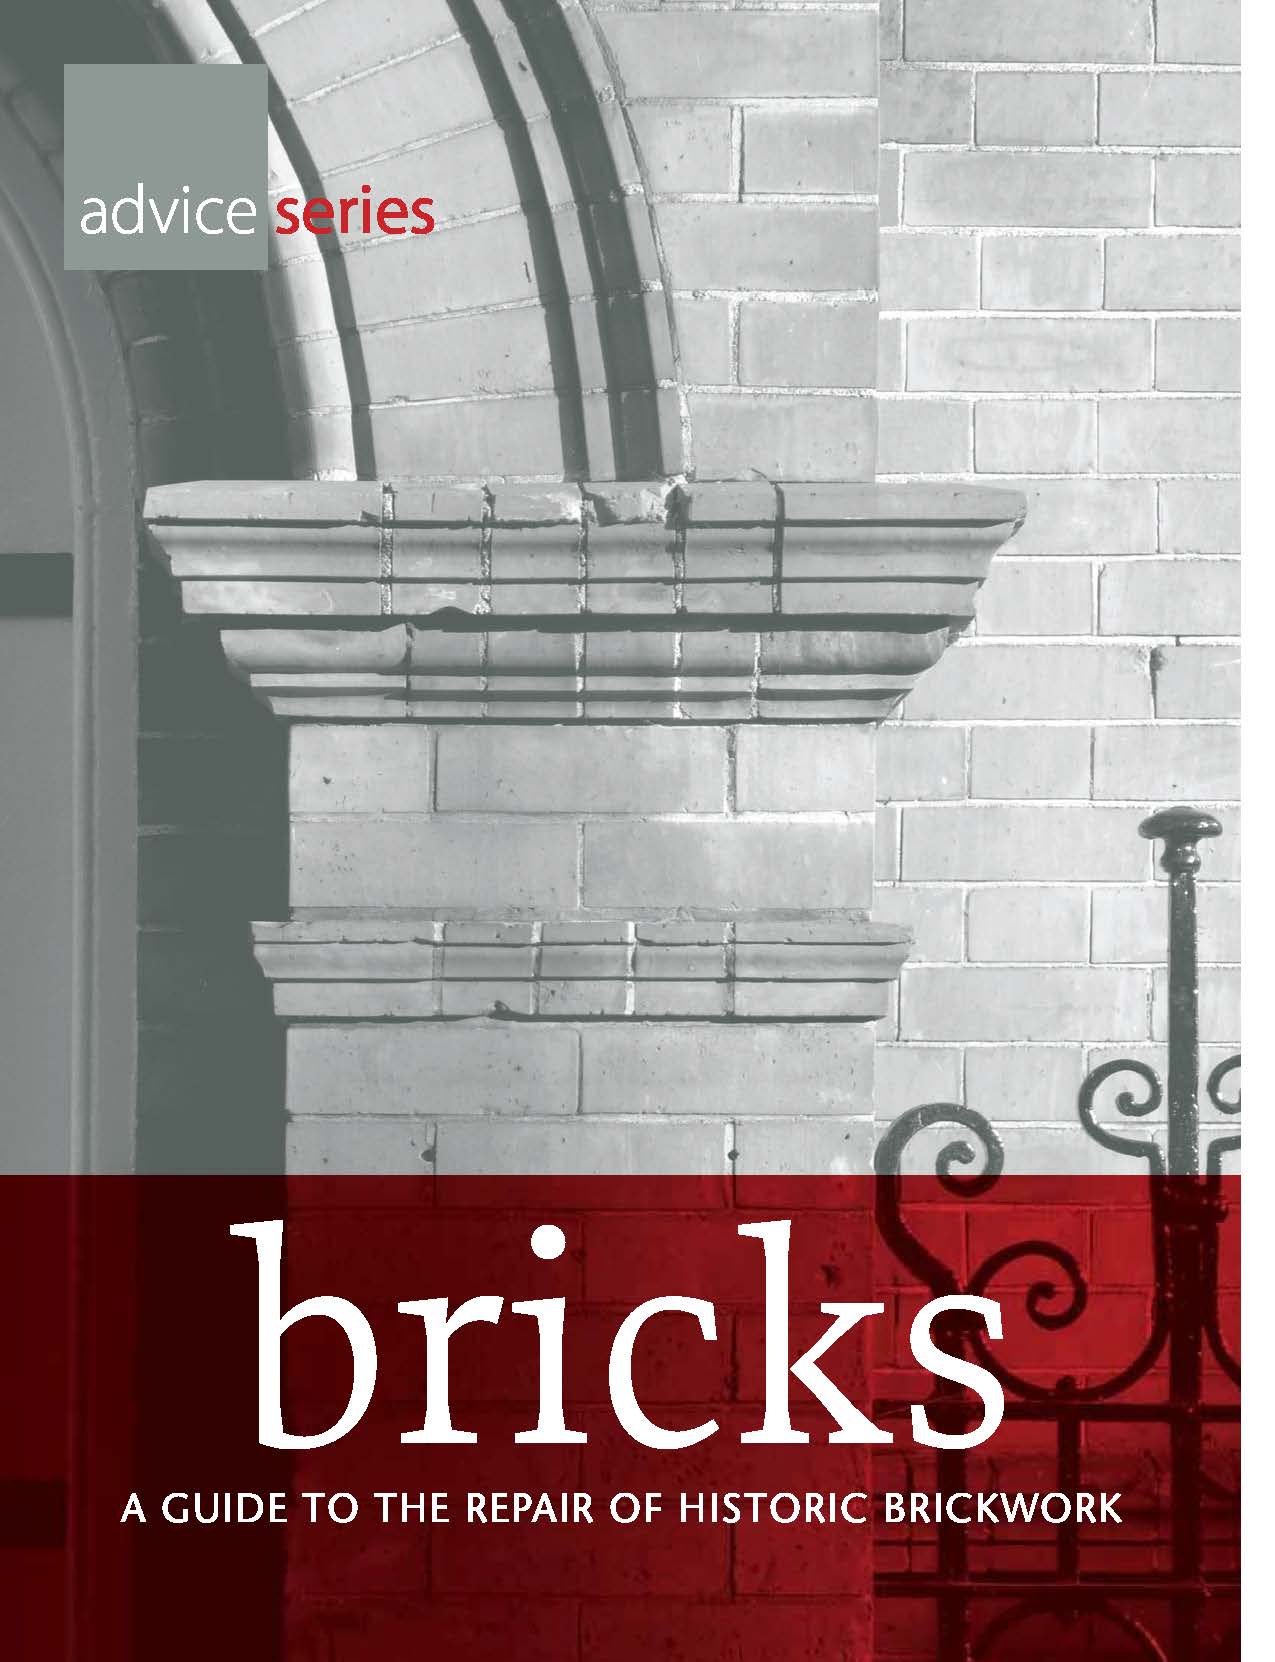 Image and link to Bricks - A Guide to the Repair of Historic Brickwork 